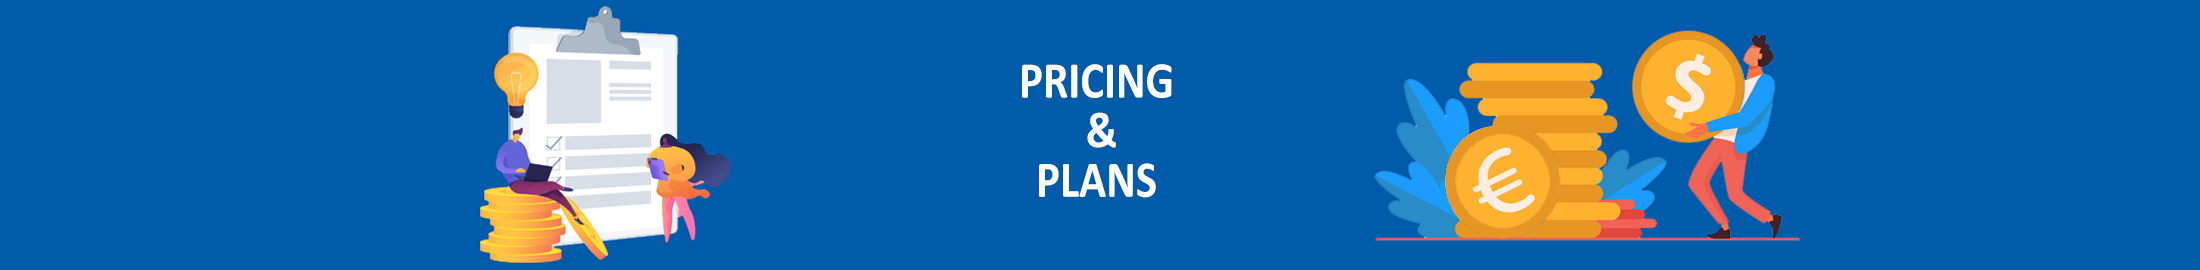 Pricing And Plans Banner